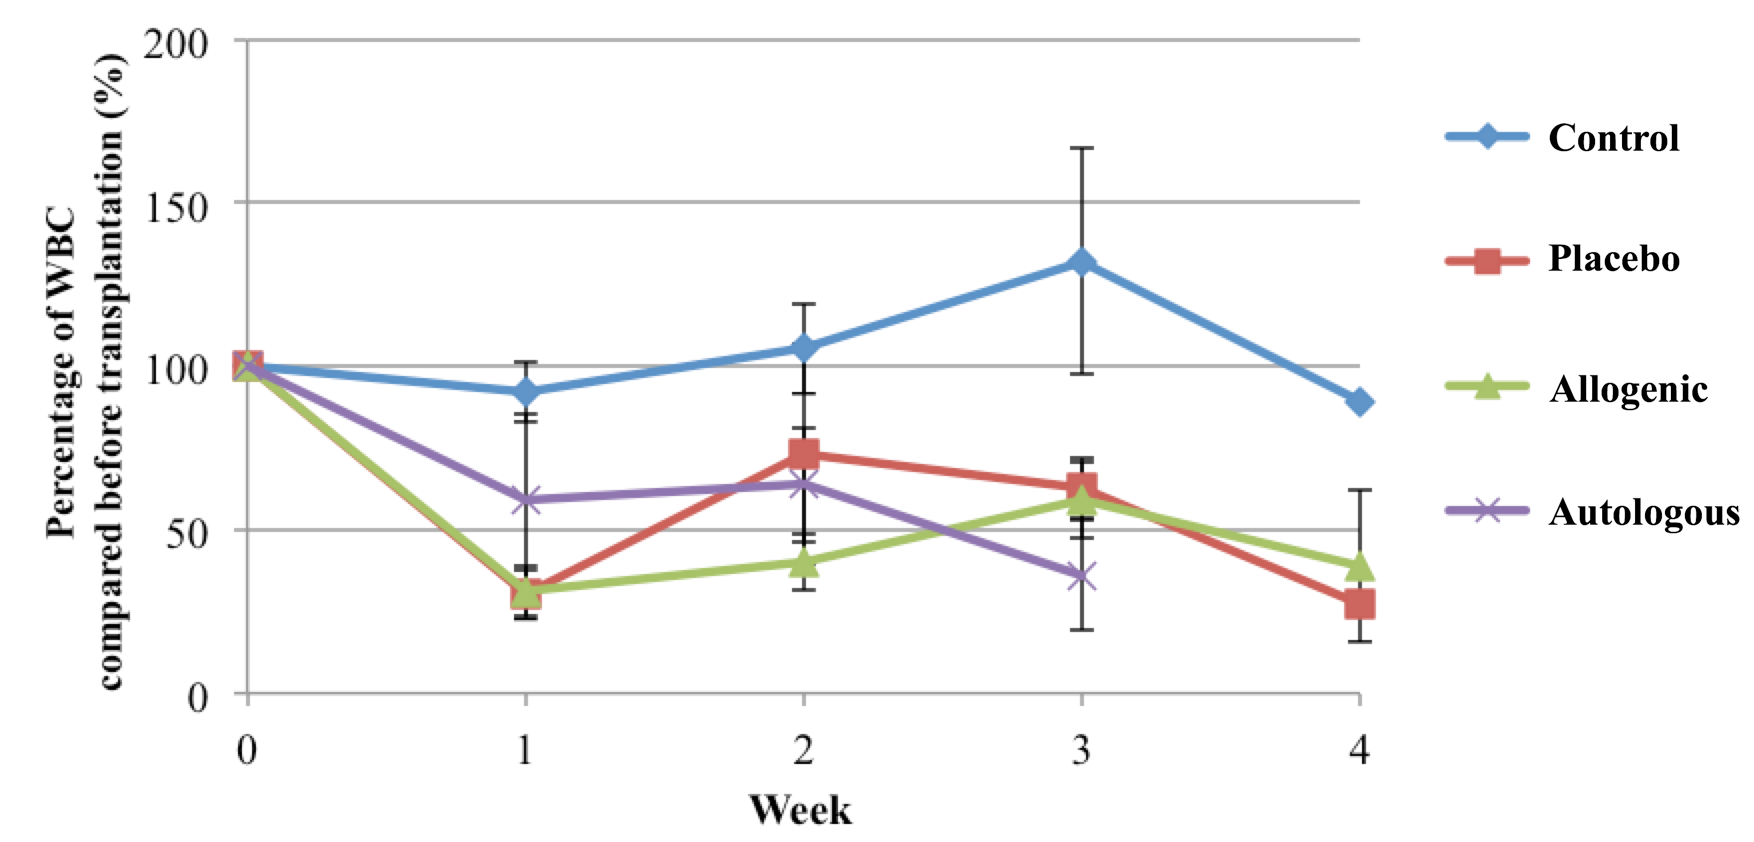 Figure 5
Change in total leukocyte count of mice with SCI after various Treatments.